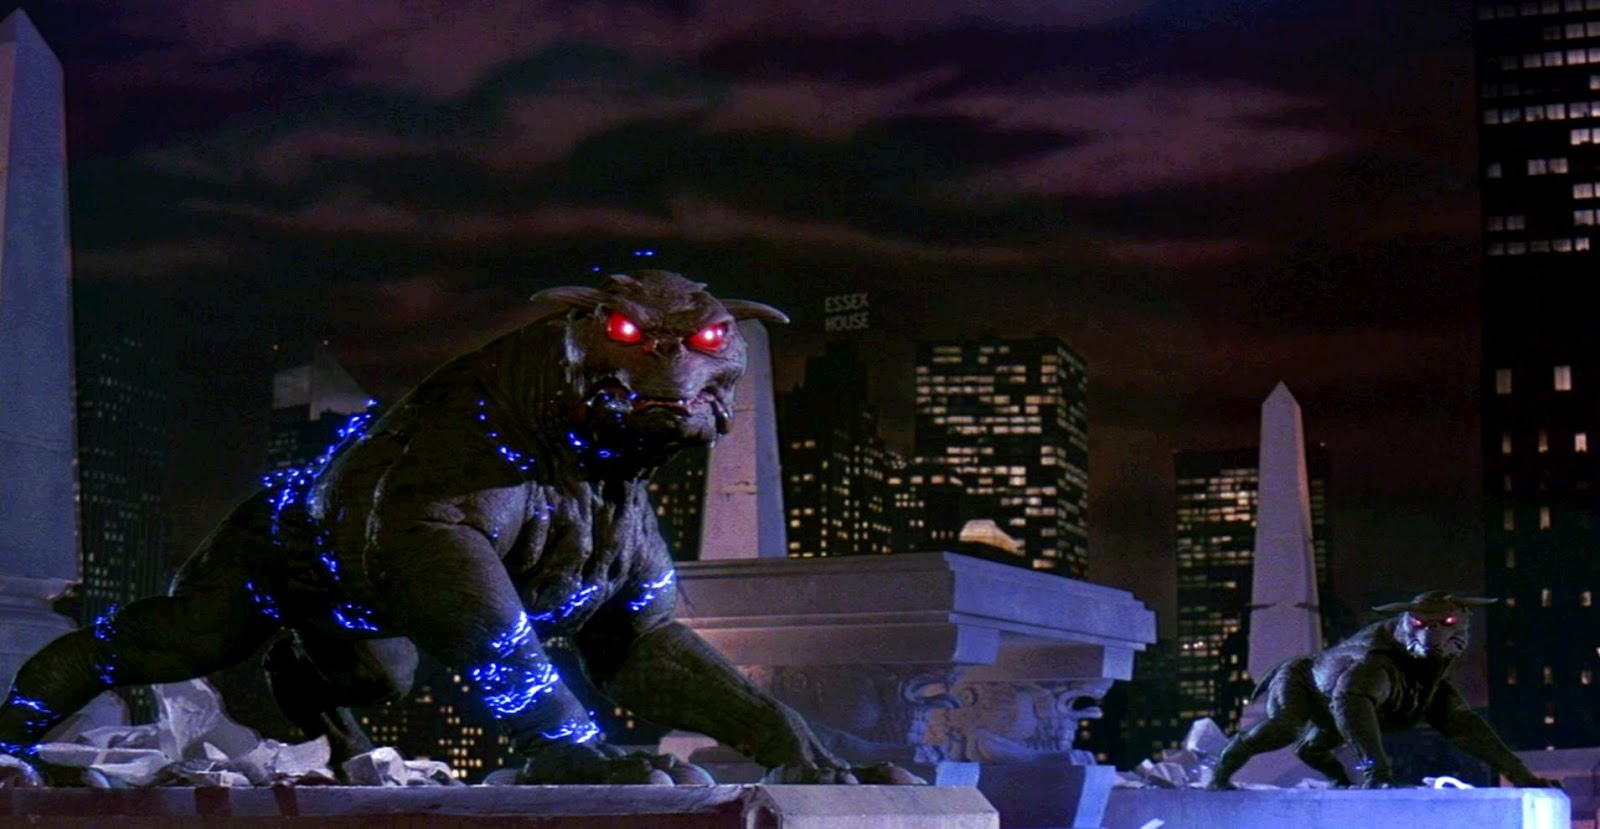 Terror Dogs as they appear in the original "Ghostbusters" movie.